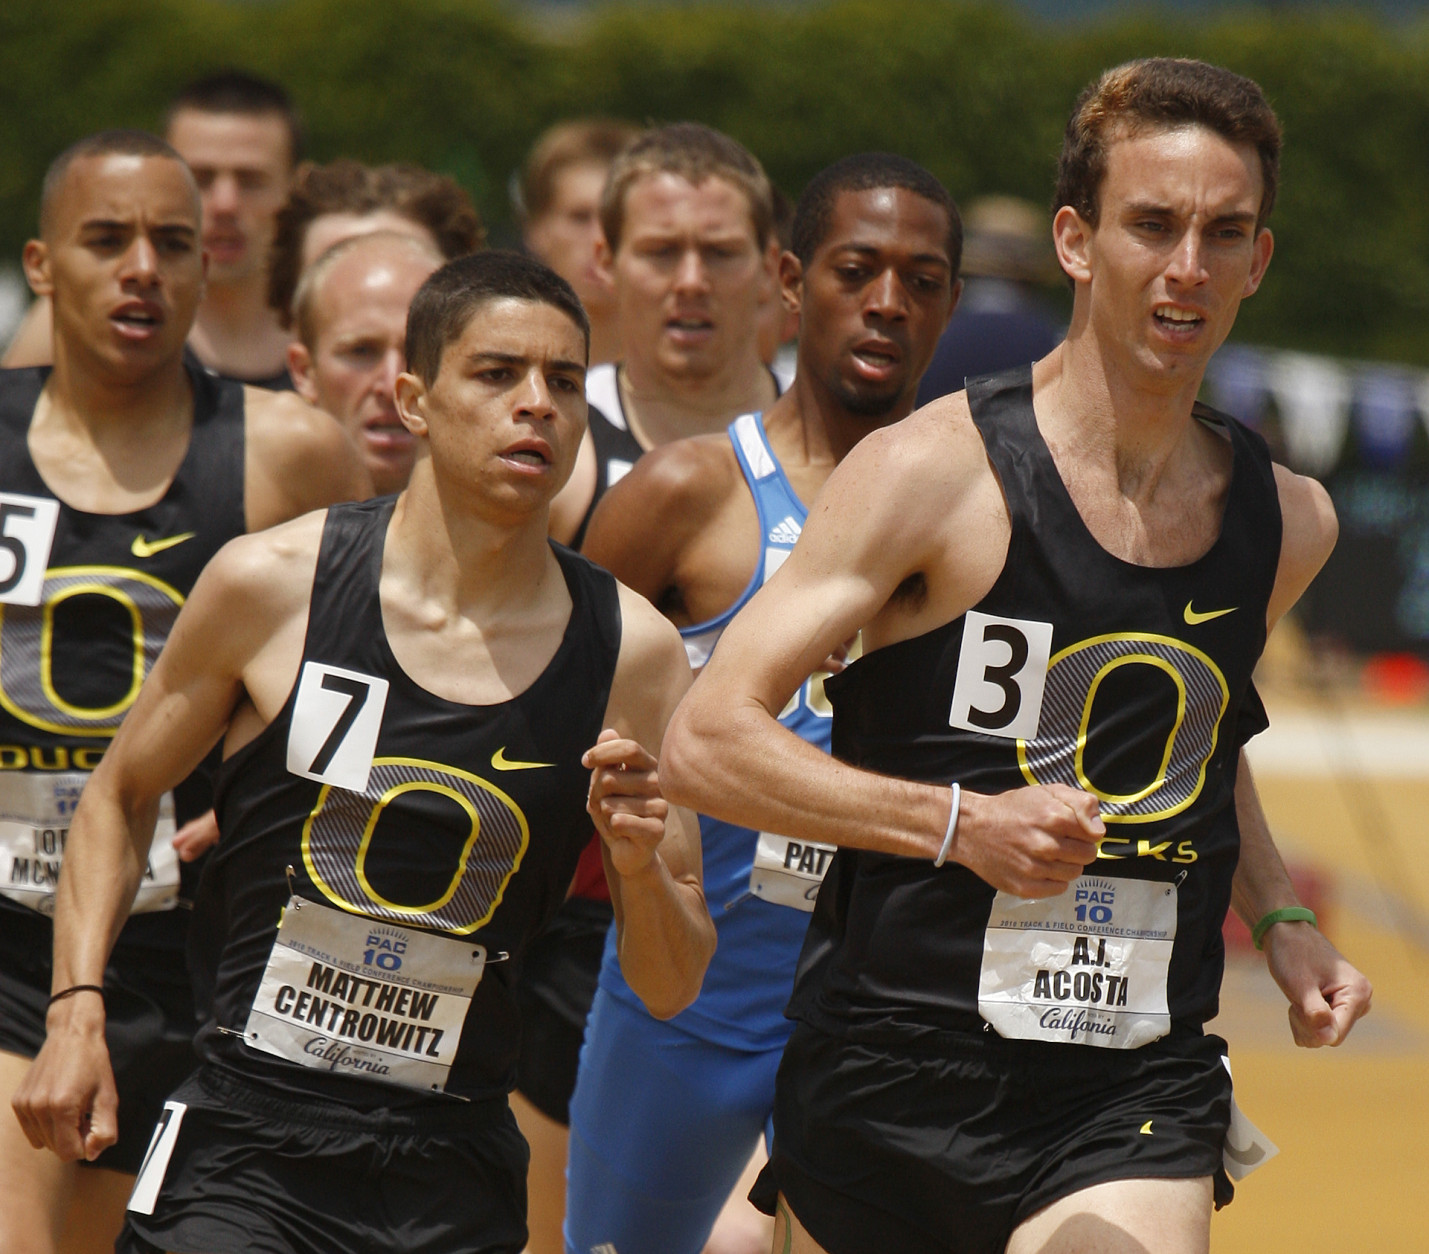 Oregon's A.J. Acosta, right, runs beside teammate Matthew Centrowitz (7) in the men's 1,500 meters Sunday, May 16, 2010, during the Pac-10 track and field championships in Berkeley, Calif. Centrowitz and Acosta finished first and second, respectively. (AP Photo/Ben Margot)